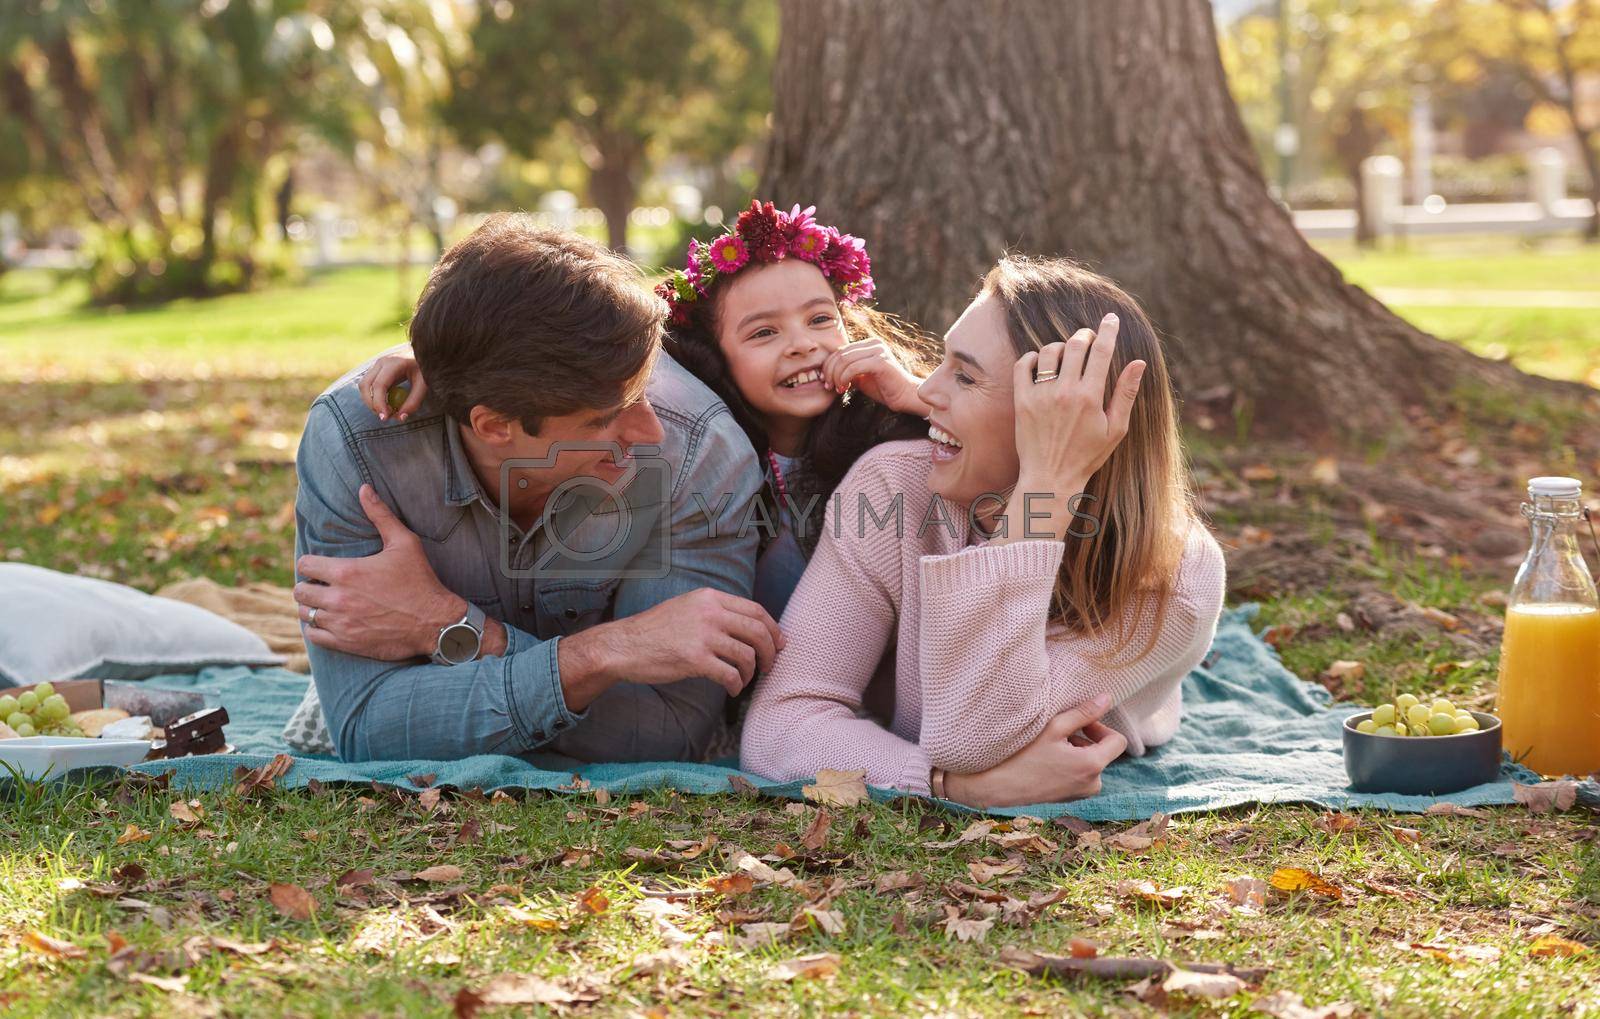 Nothing says family time like a picnic in the park. a happy young family enjoying a picnic in the park